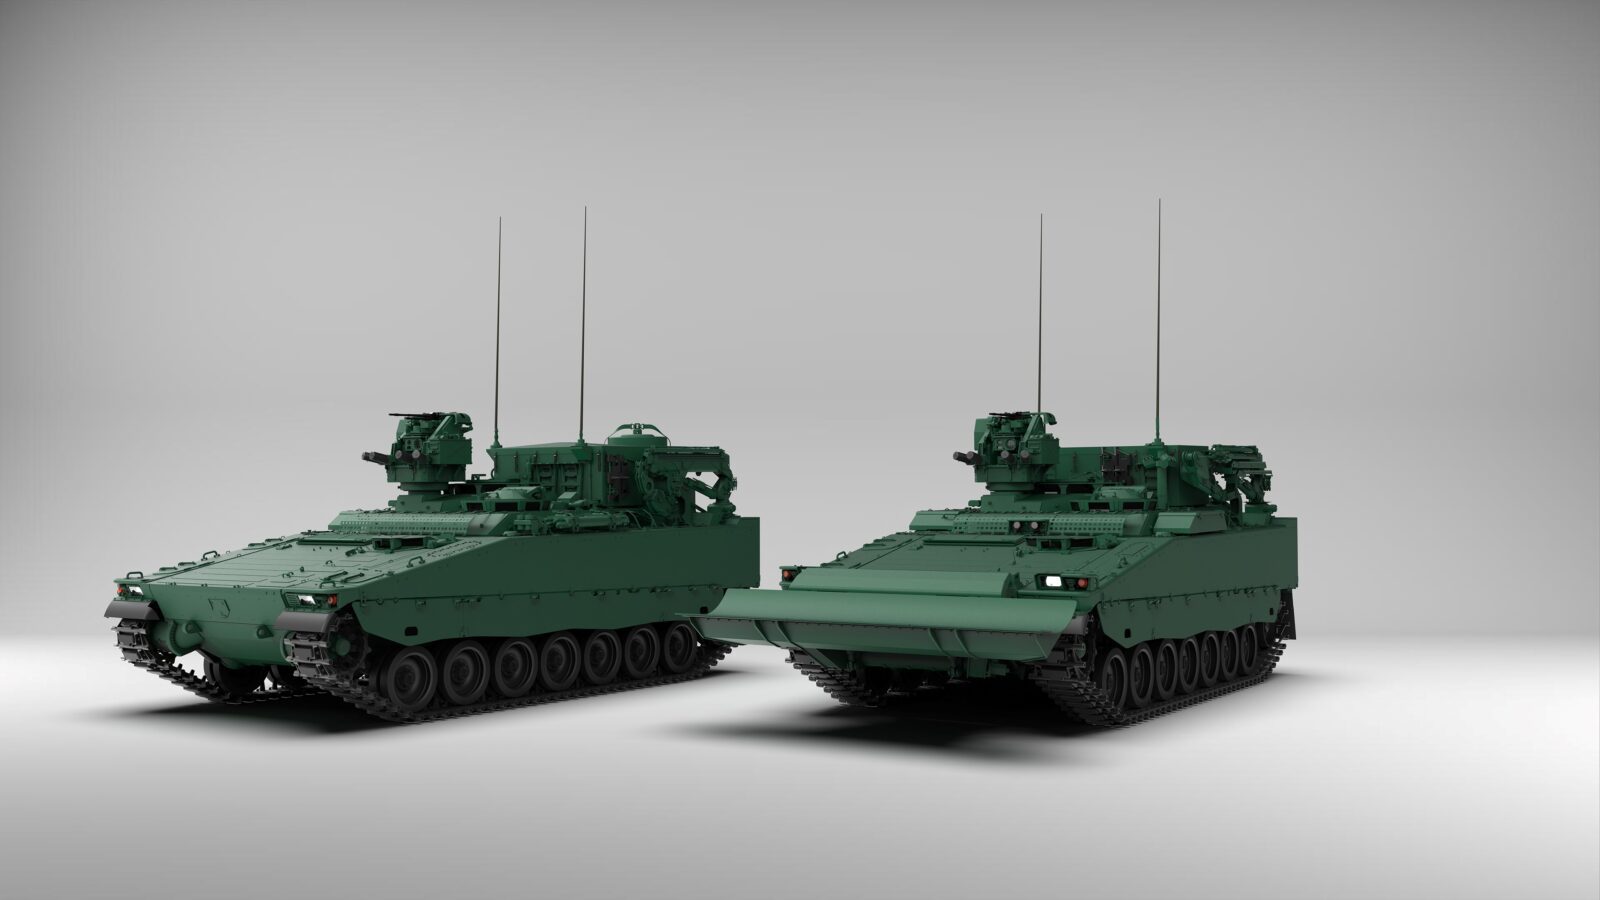 BAE Systems and Ritek AS to produce two new CV90 variants for the Swedish Armed Forces